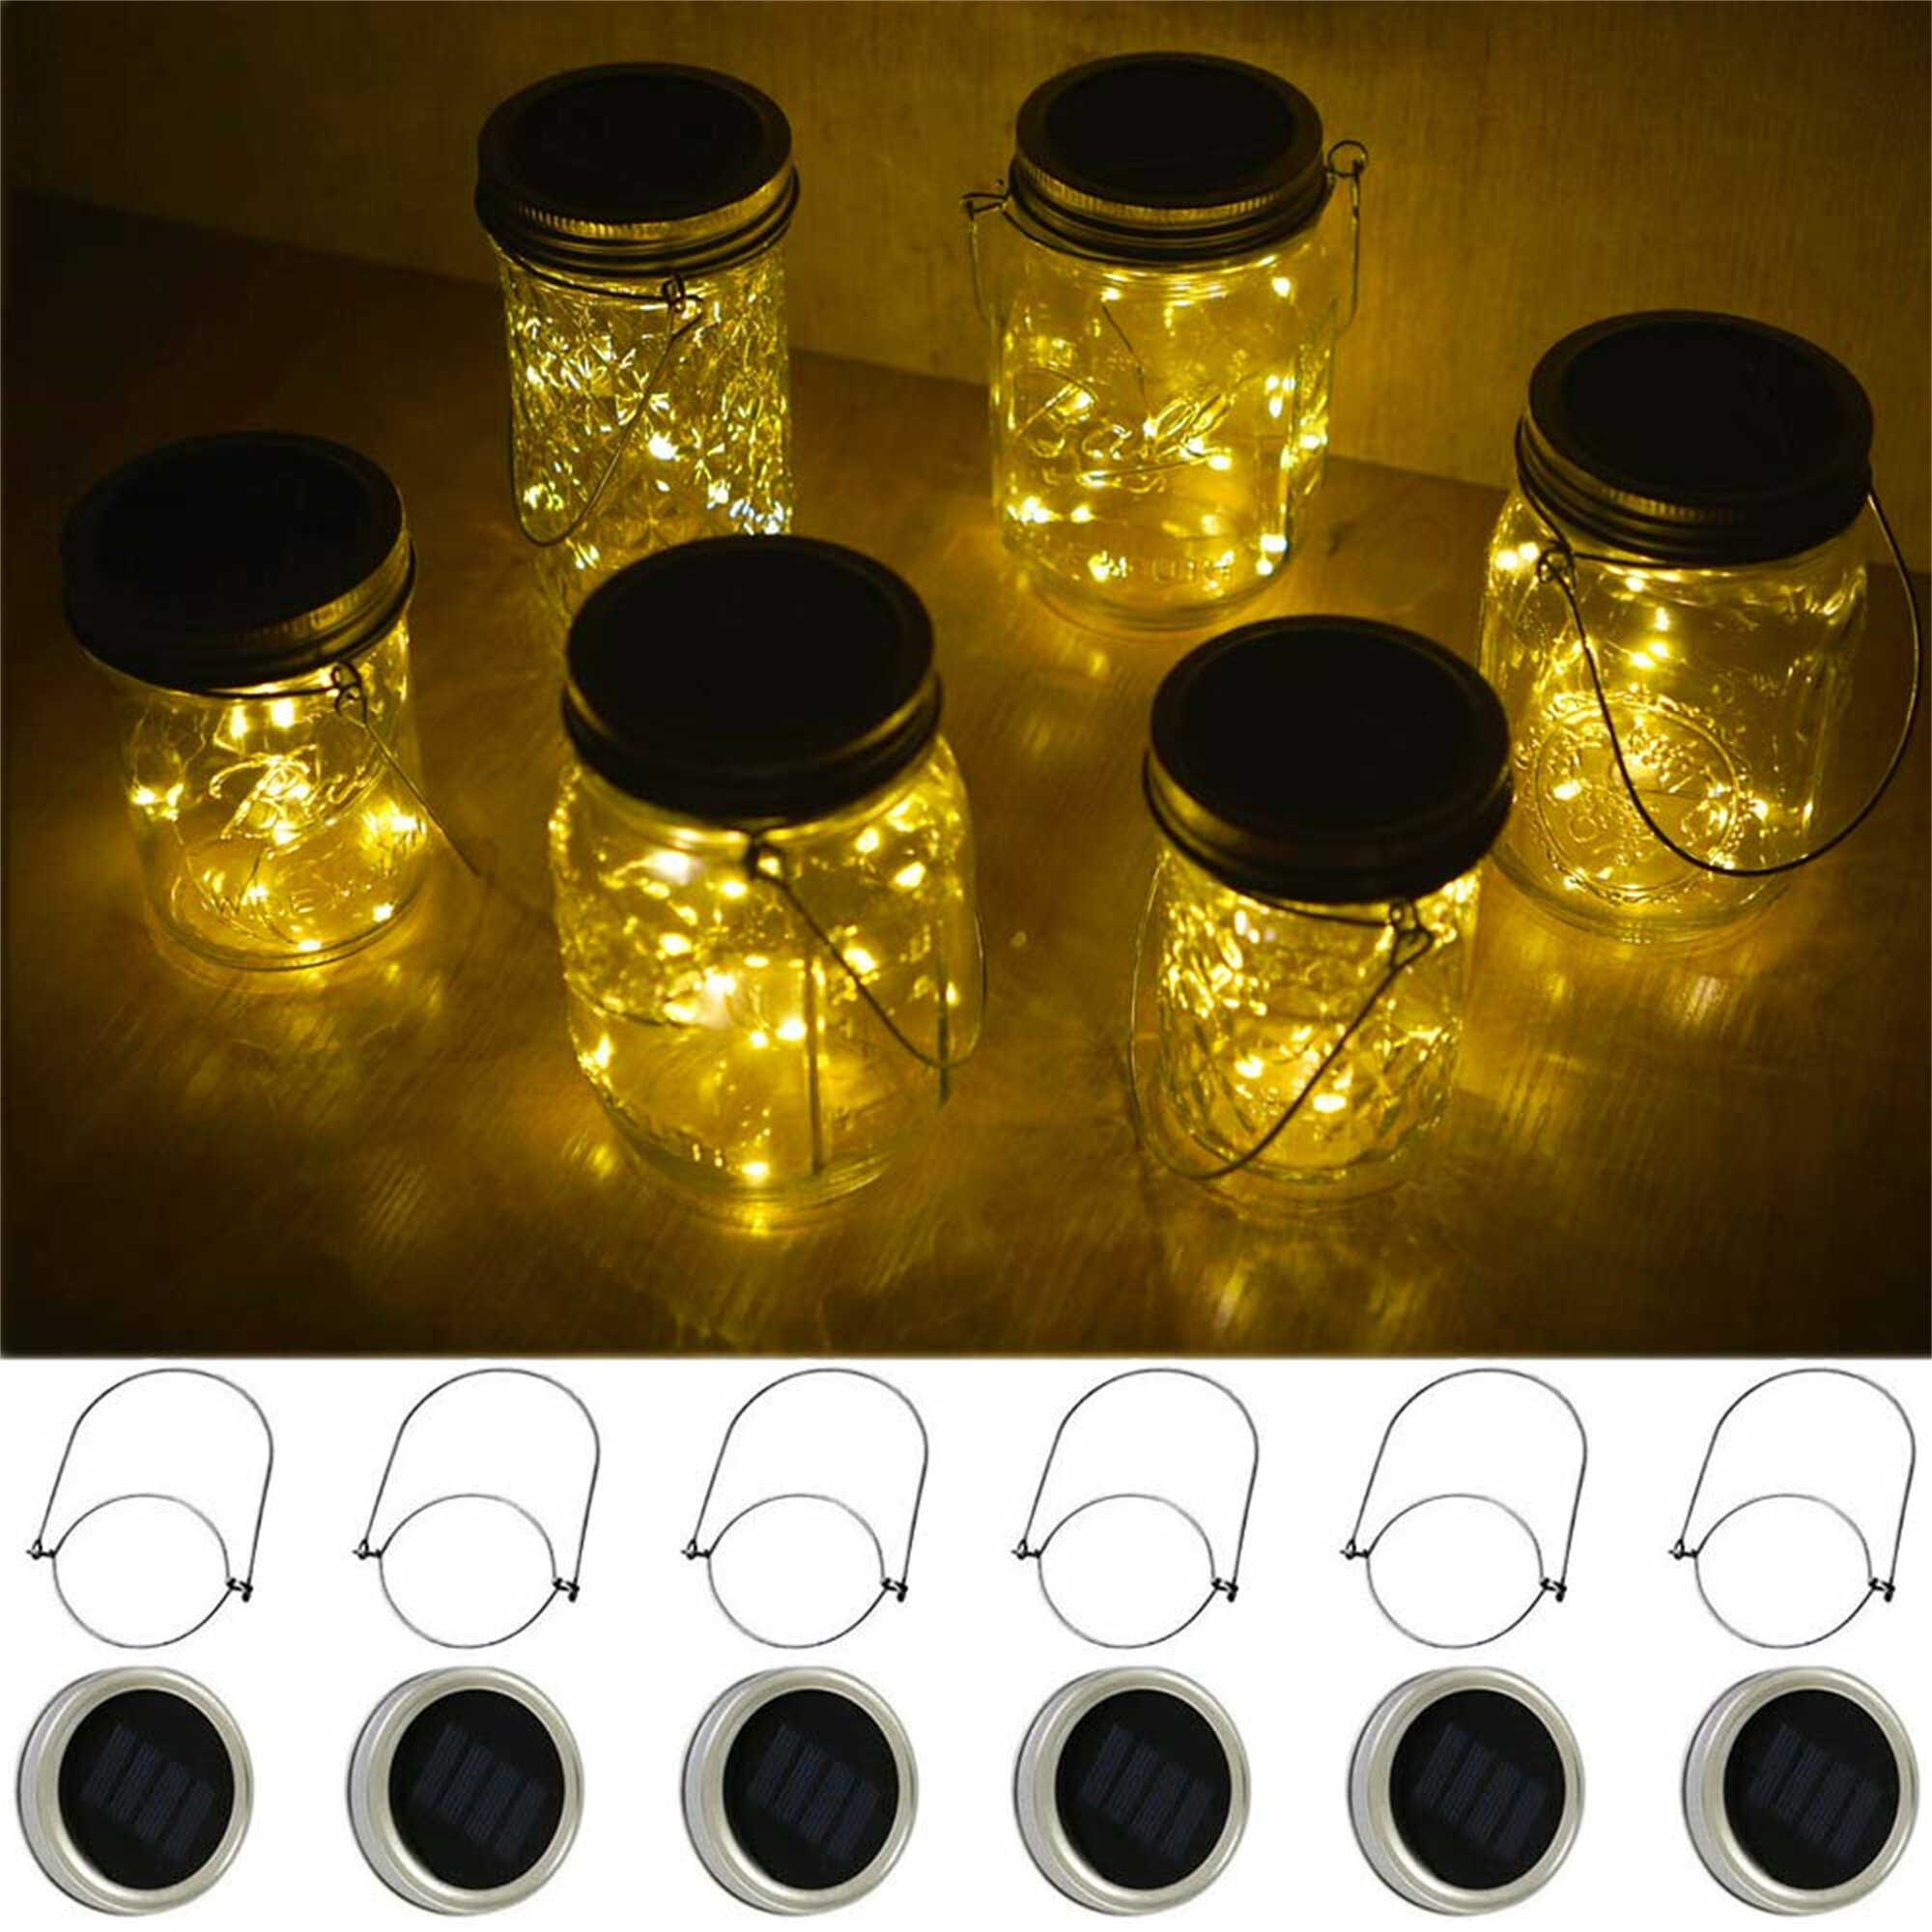 Jars Not Included 6 Pack Mason Jar Lights 10 LED Solar Colorful Fairy String Lights Lids Insert for Patio Yard Garden Party Wedding Christmas Decorative Lighting Fit for Regular Mouth Jars 